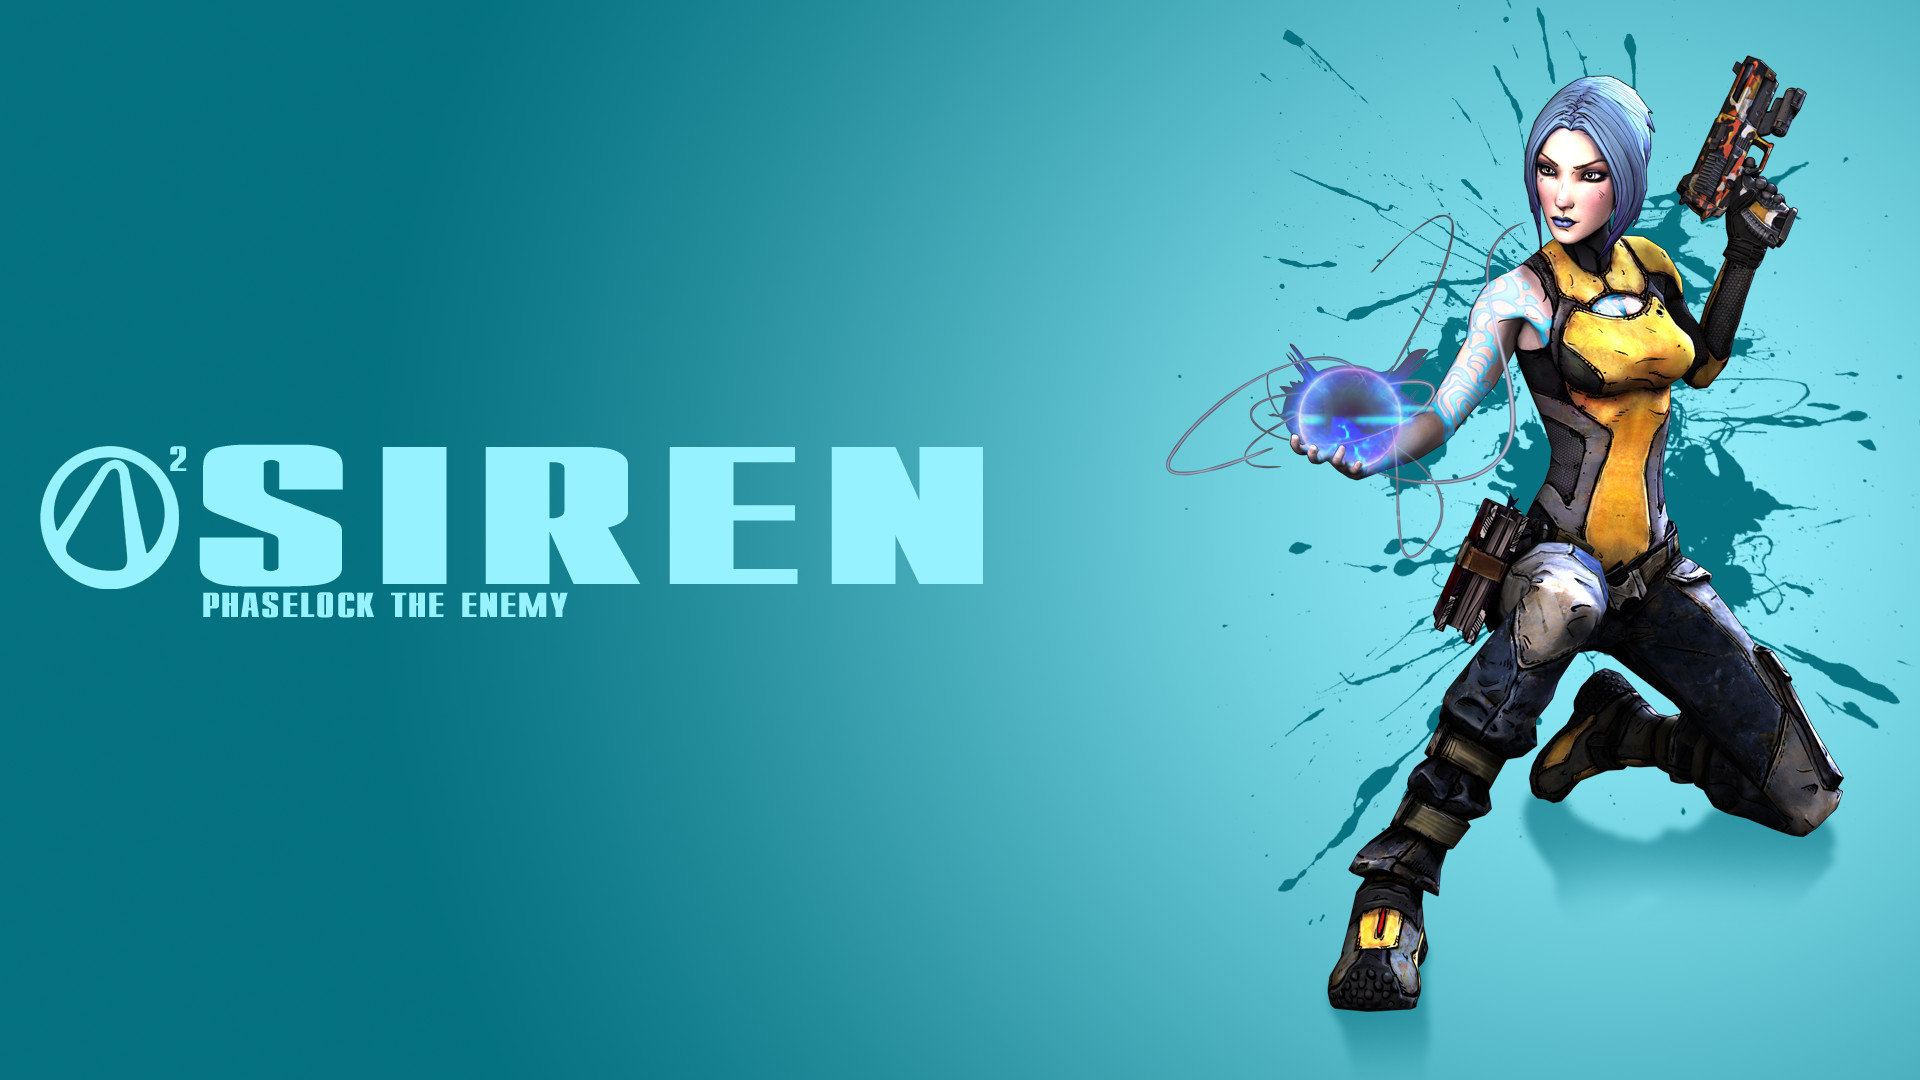 1920x1080 ... Represent Your Borderlands 2 Character With Some Fancy Wallpaper